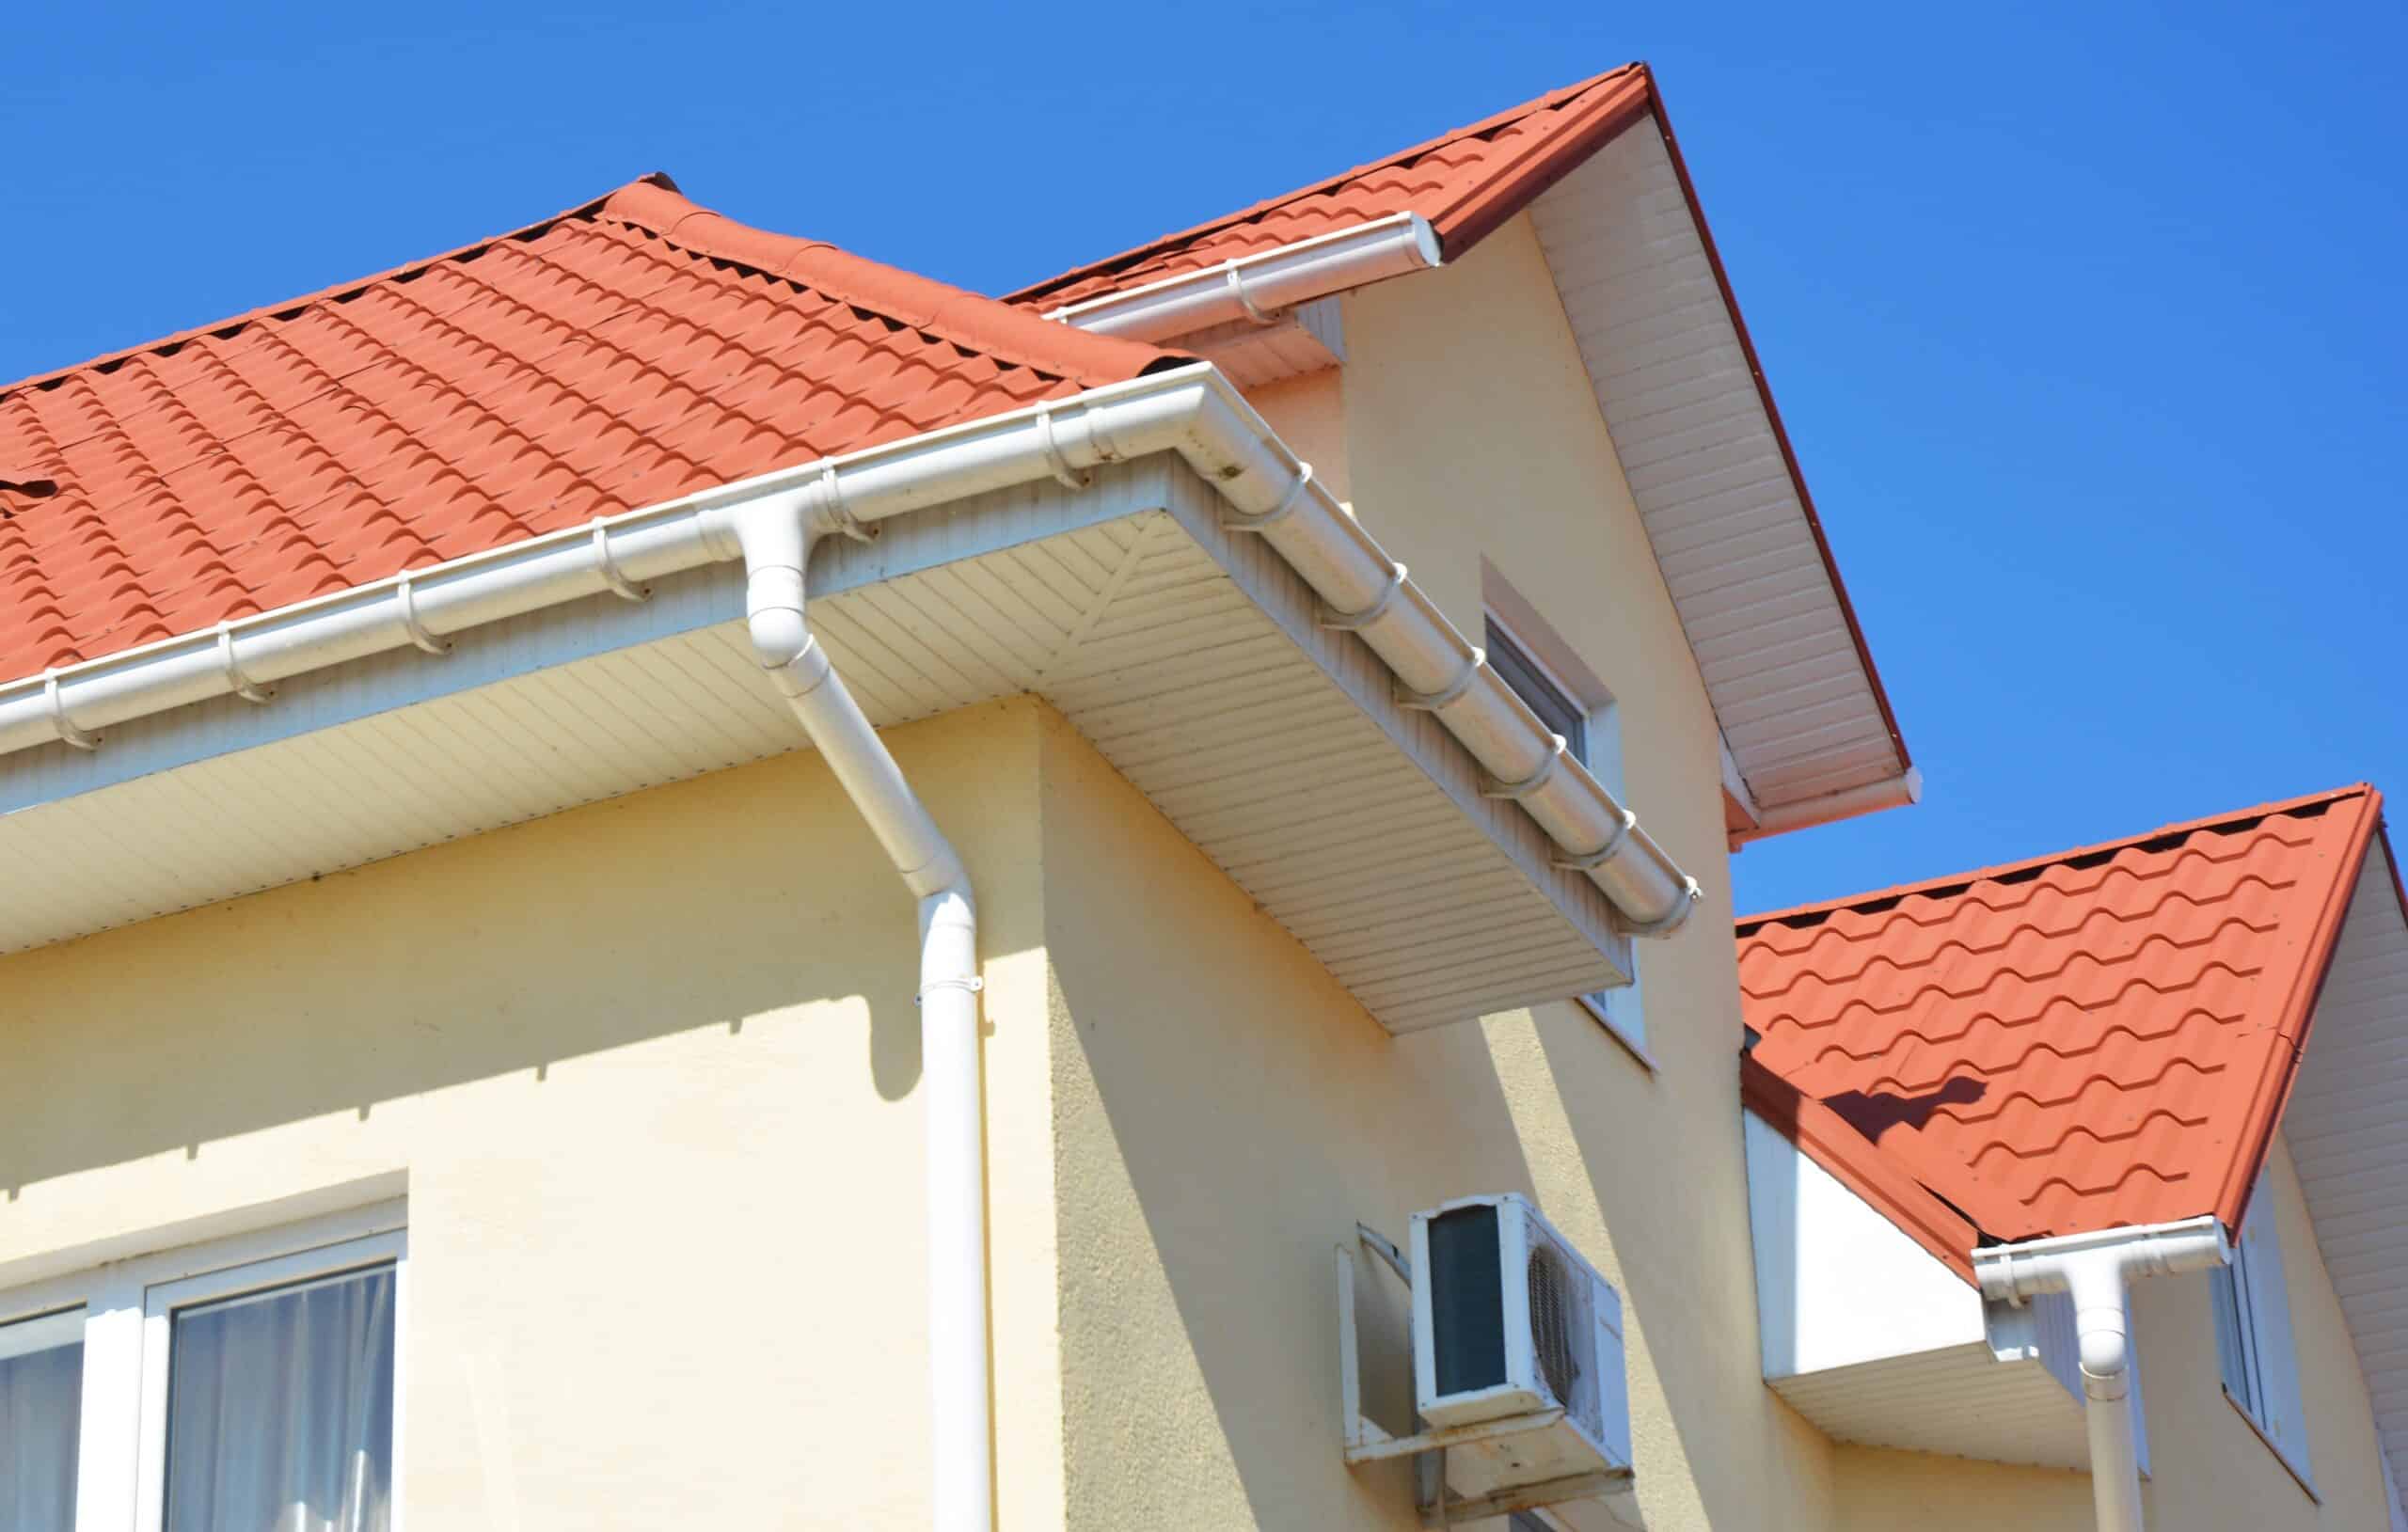 Explore Roof Extension Benefits in this blog, discovering how they add value and space to your dream home. Contact us now!